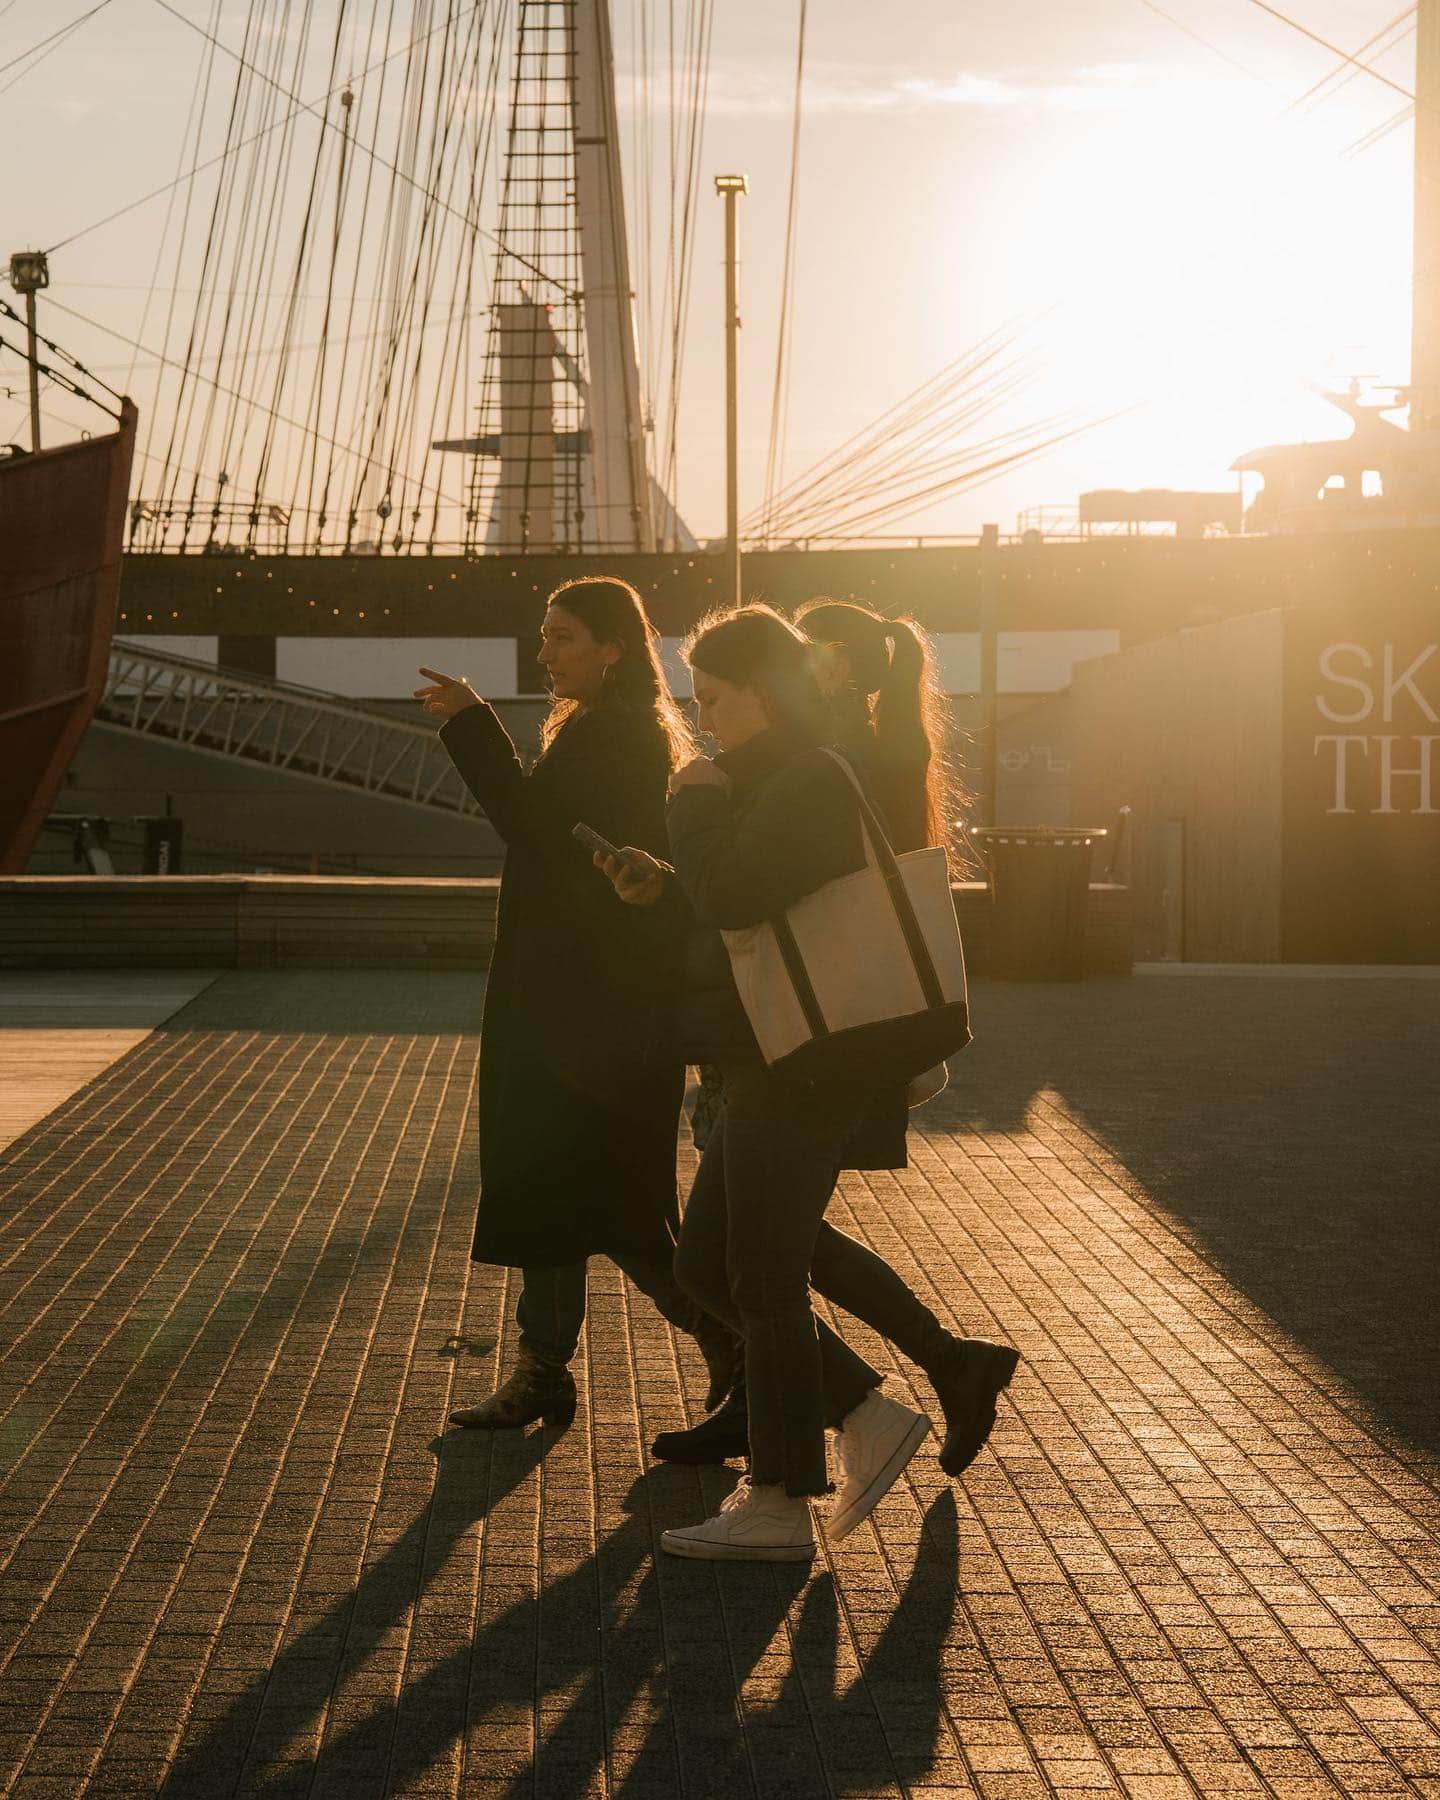 Daytime explorers. Weeknight wanderers Get Lost. Find New York. #TheSeaport